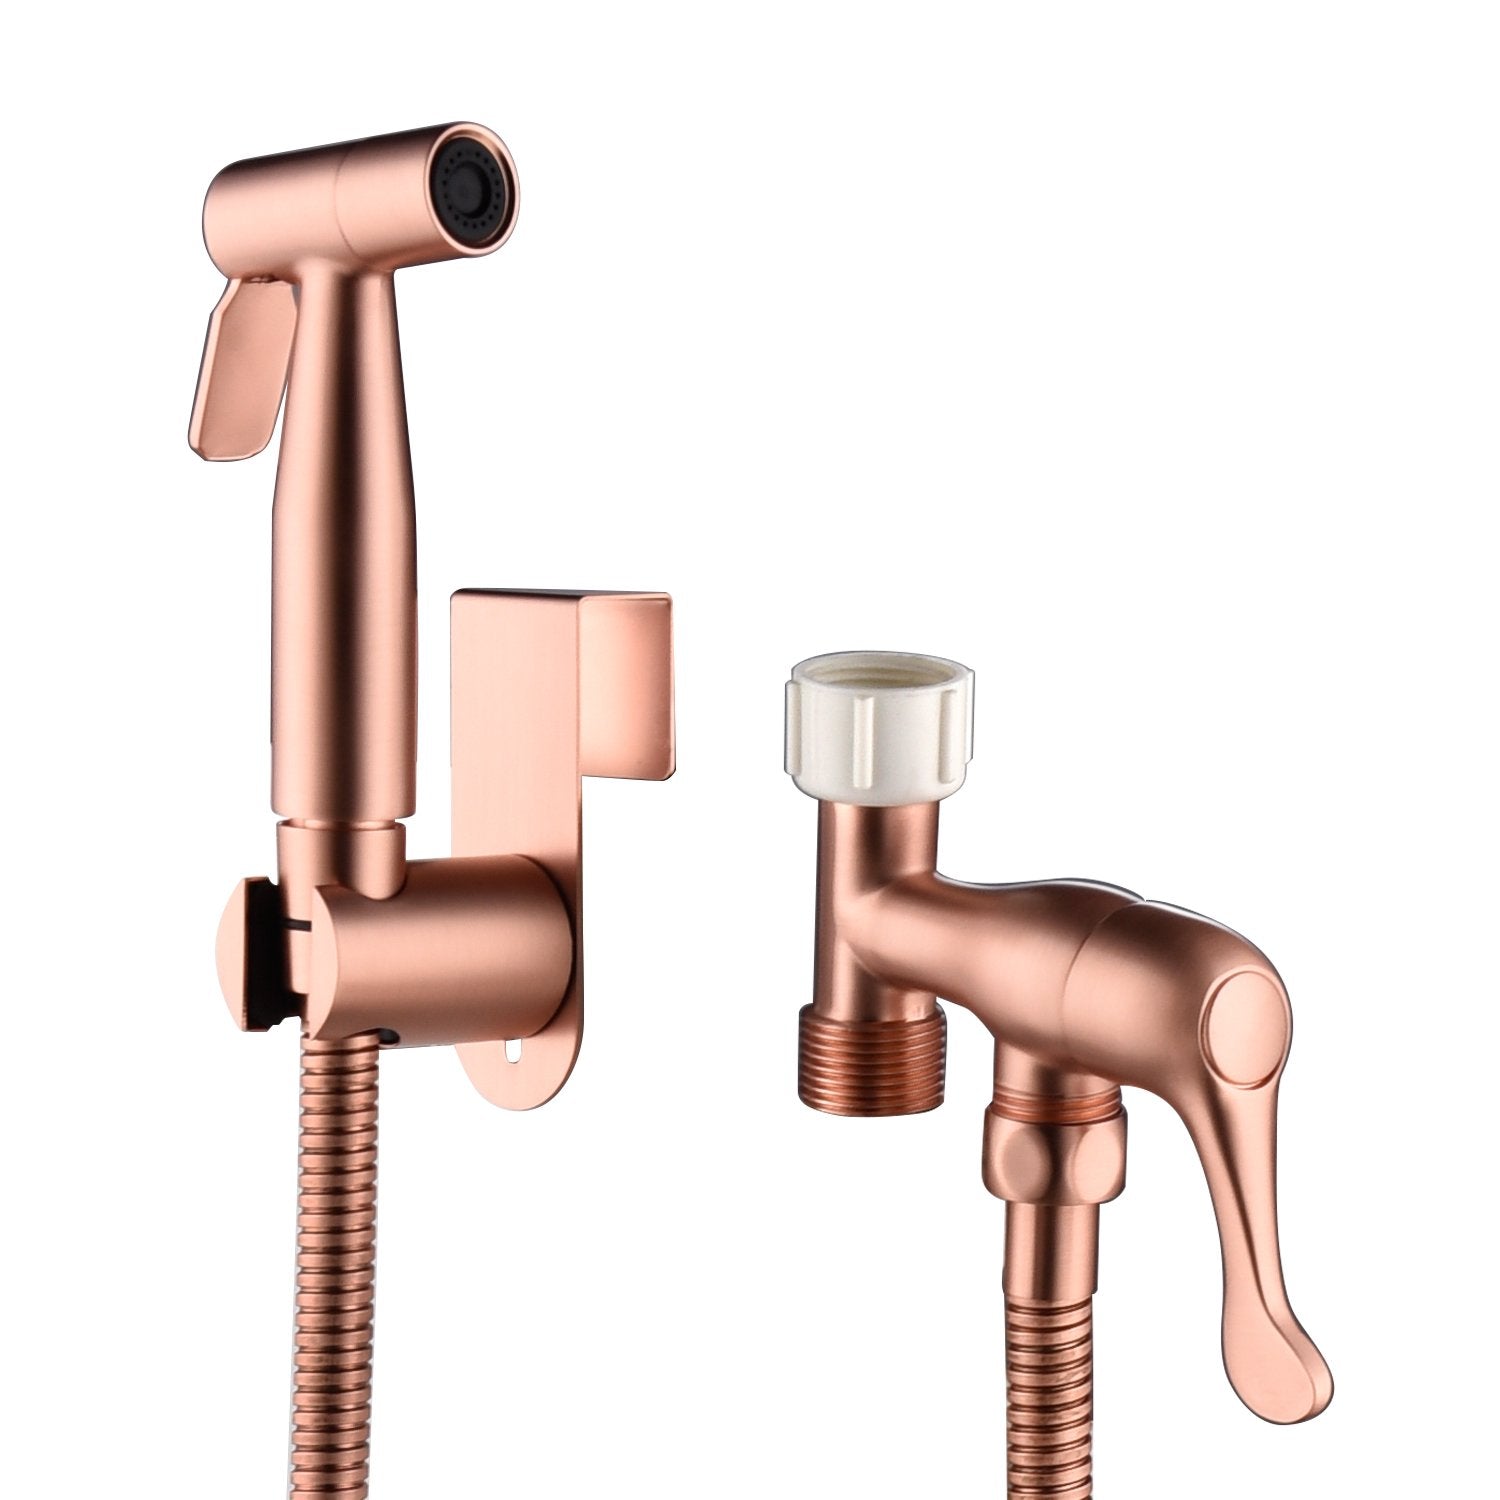 Single-Handle Bidet Faucet with Sprayer Holder, Solid Brass T-Valve and Flexible Hose in Brushed Rose Gold